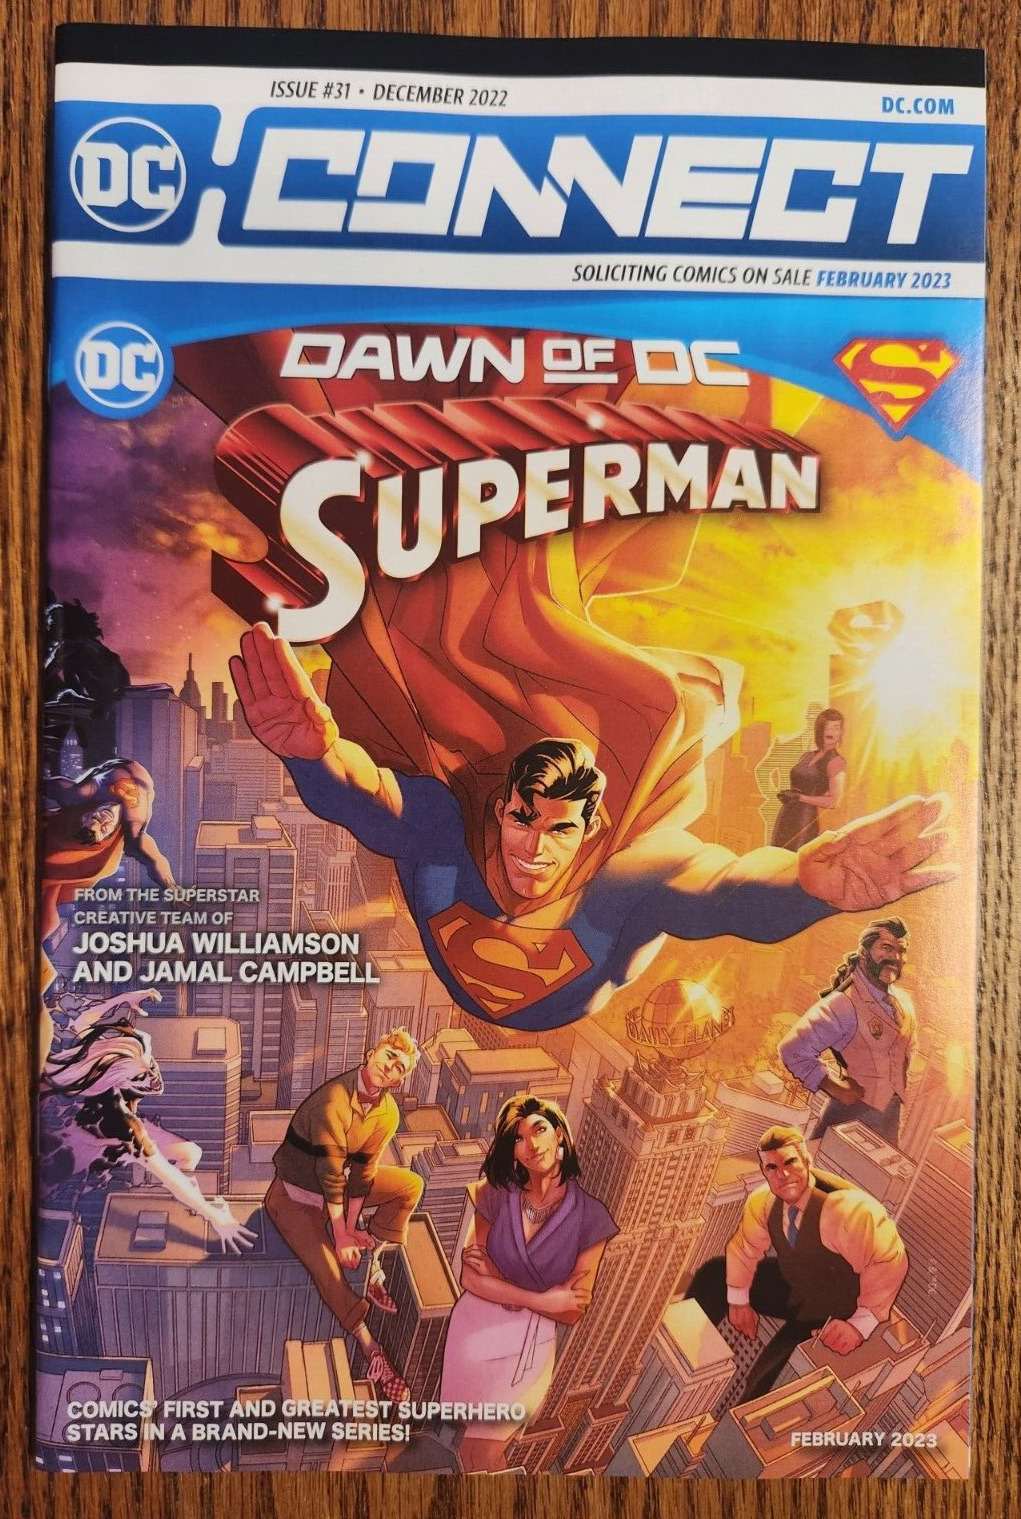 DC Connect December #31 December 2022 Dawn of DC Superman Comic Book Preview